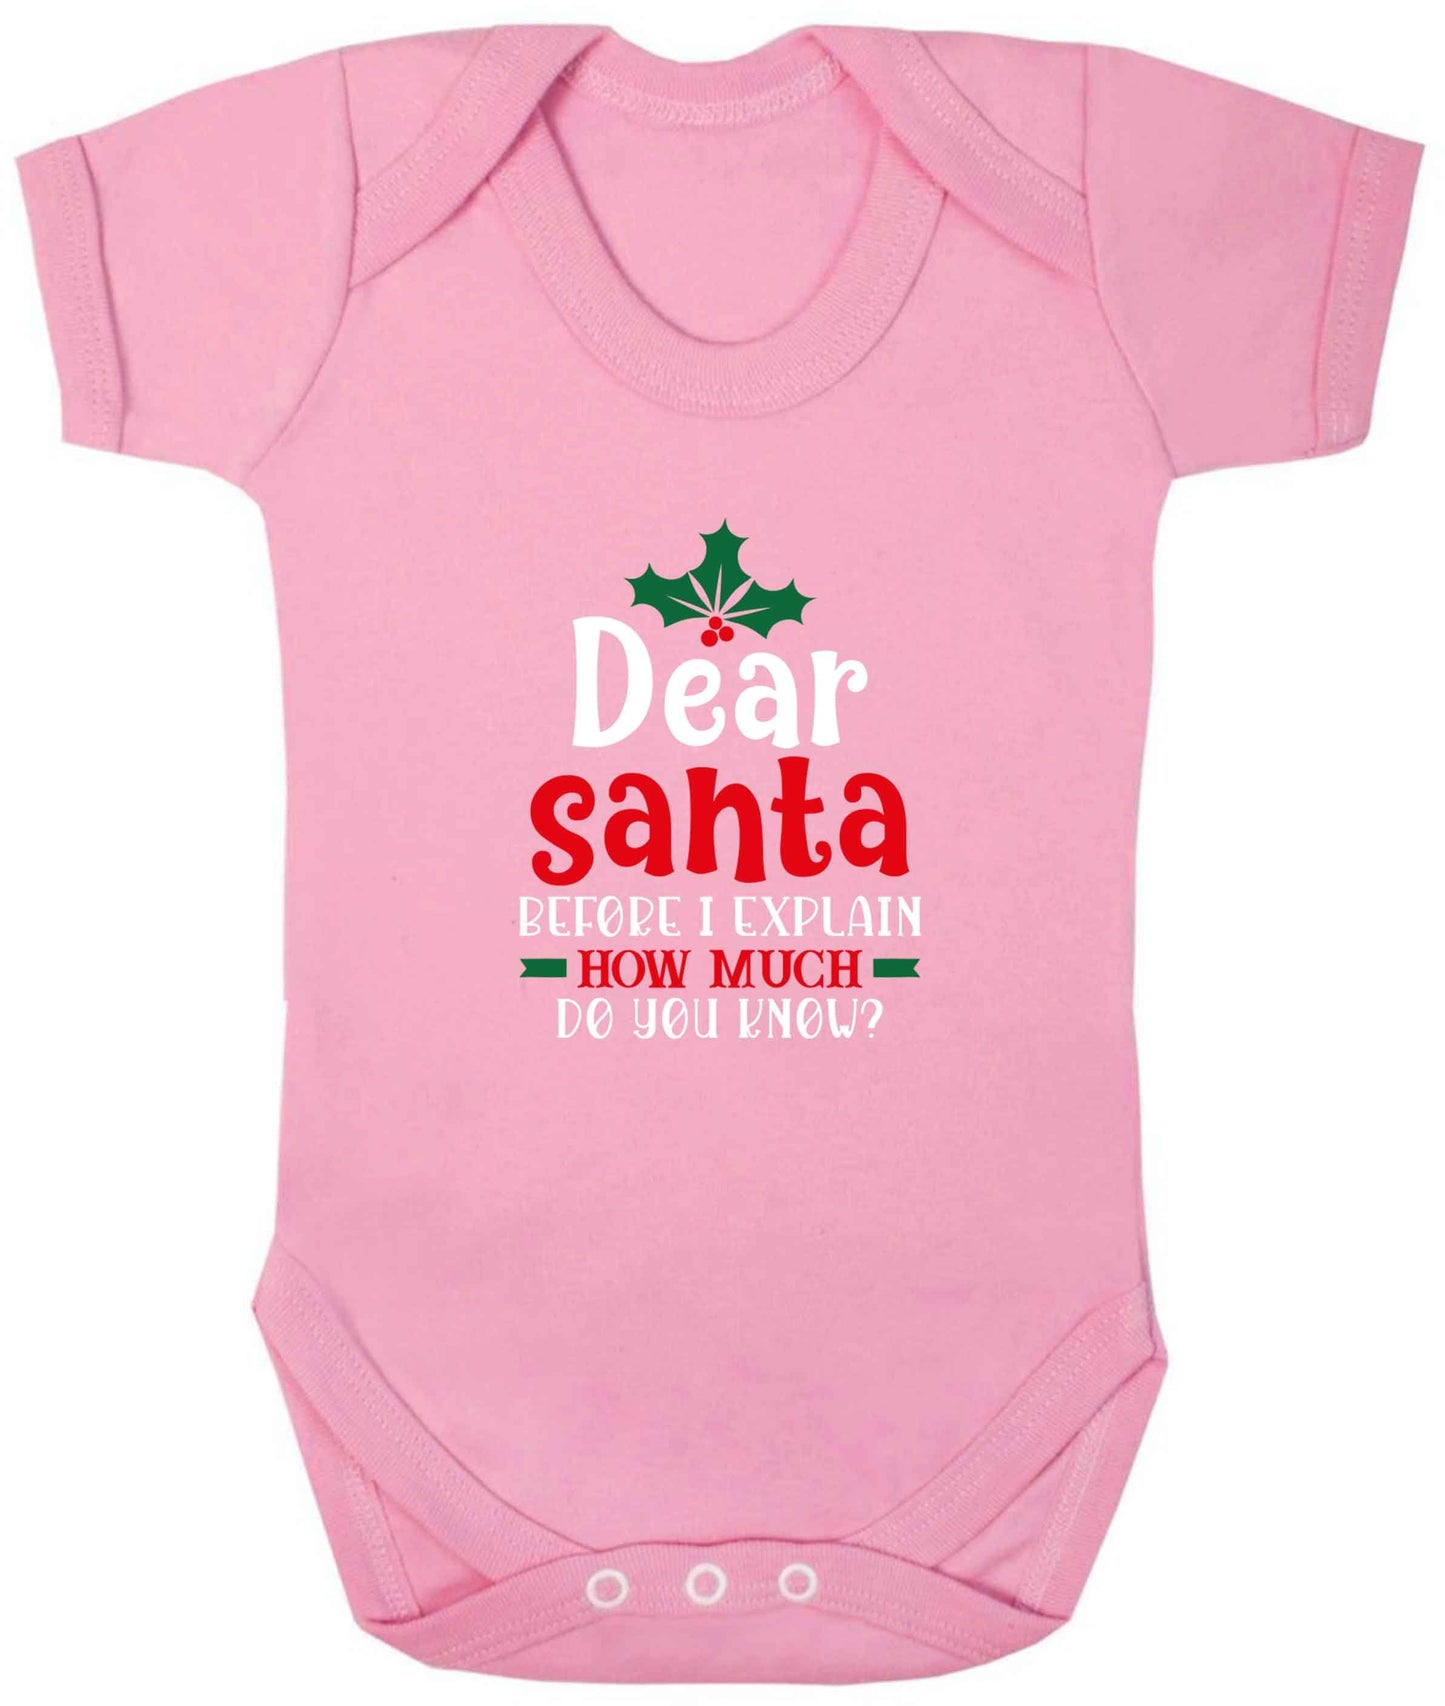 Santa before I explain how much do you know? baby vest pale pink 18-24 months